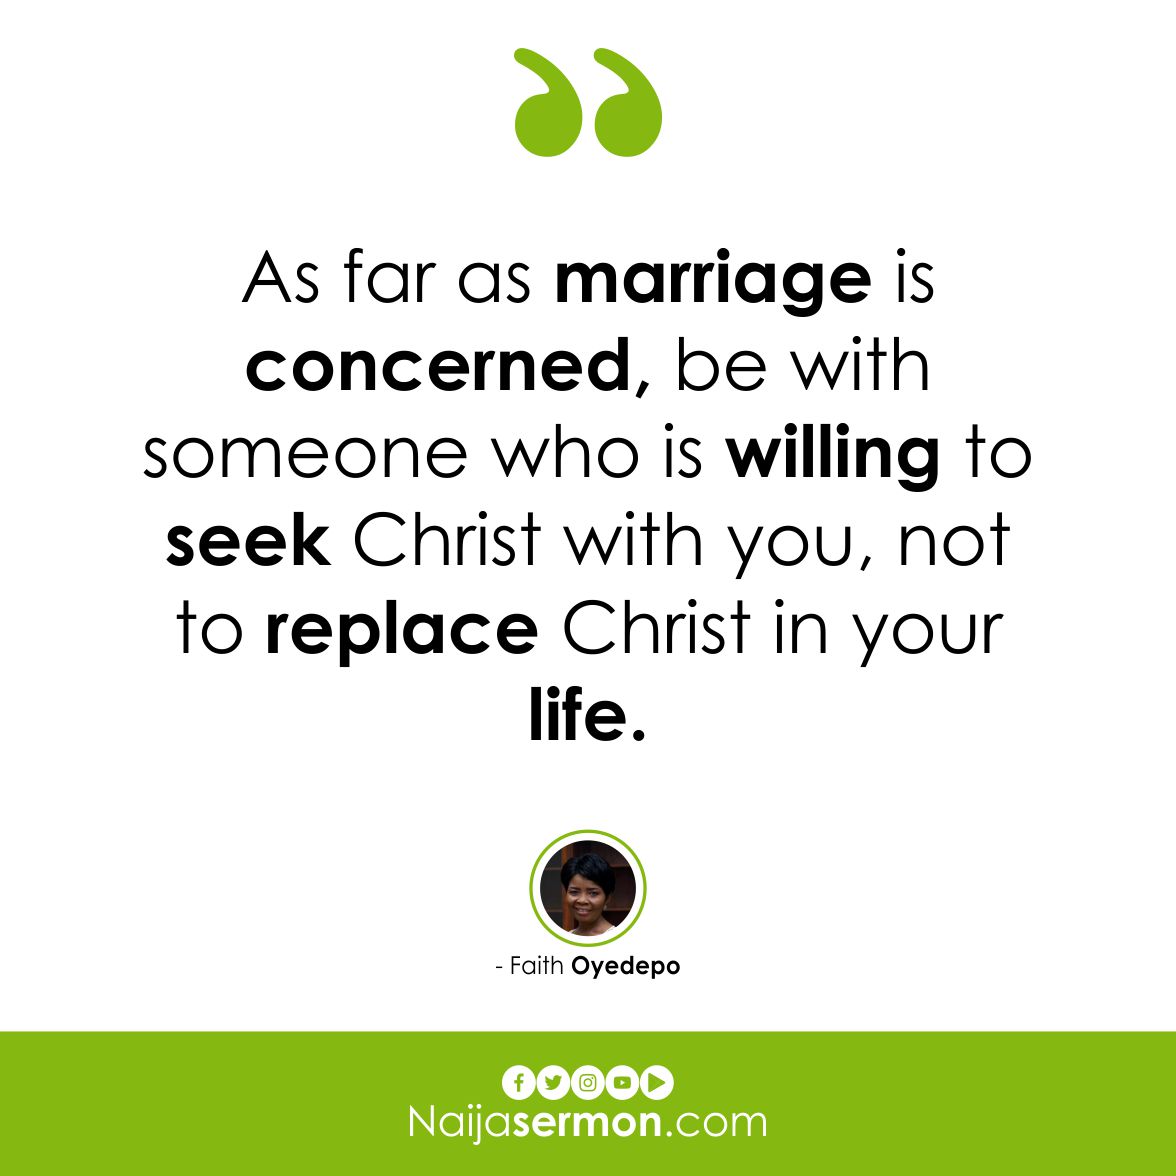 Quote of the Day by Faith Oyedepo 19